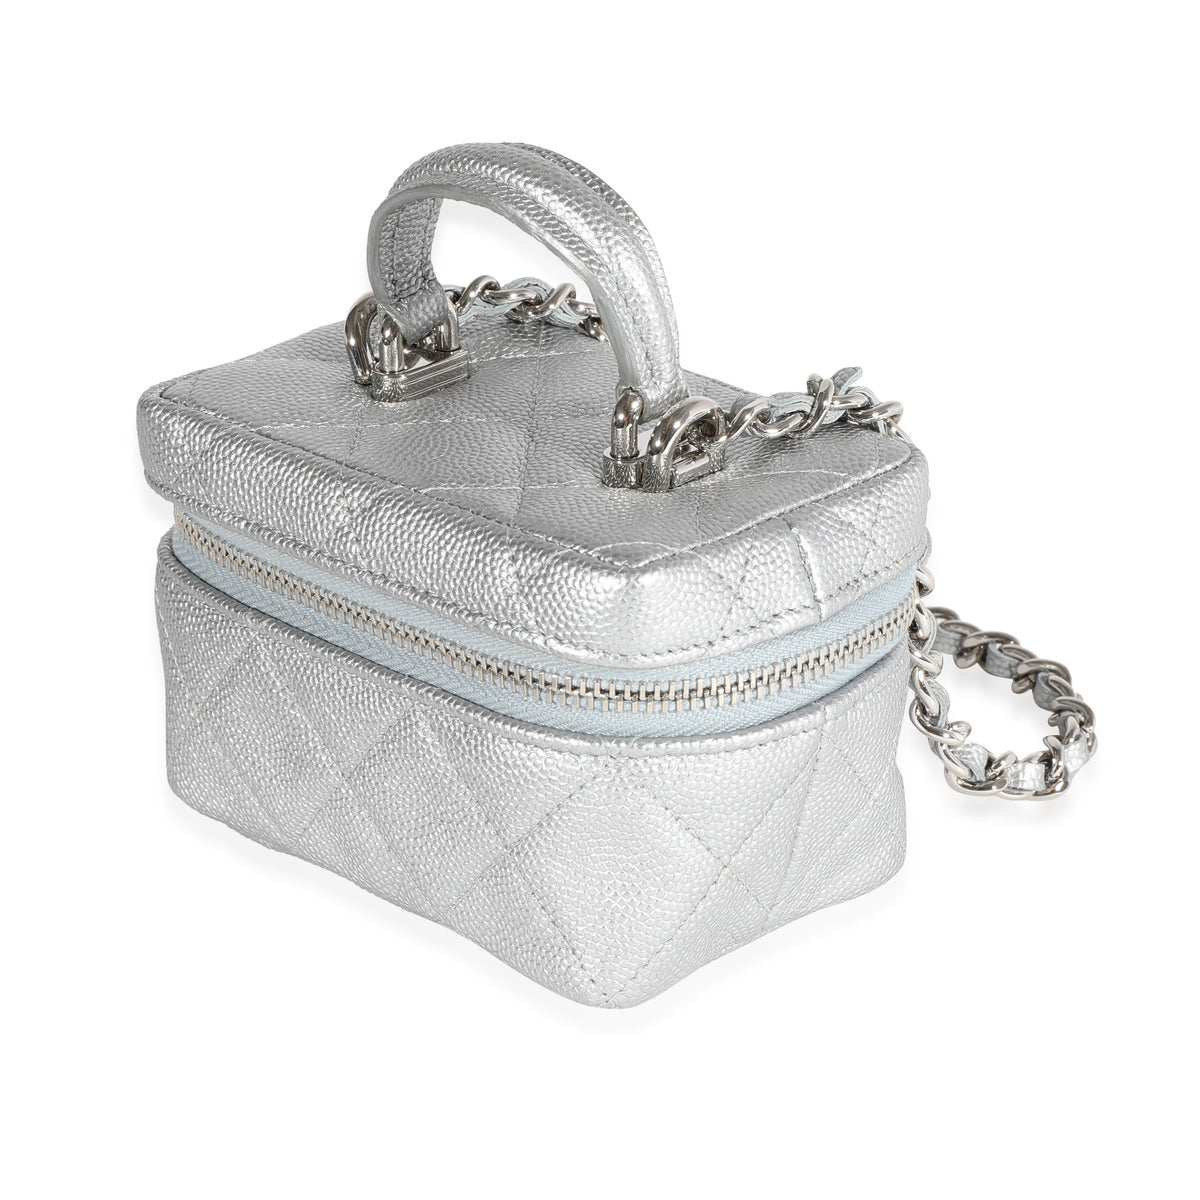 Chanel Silver Metallic Quilted Caviar Mini Vanity Bag With Chain